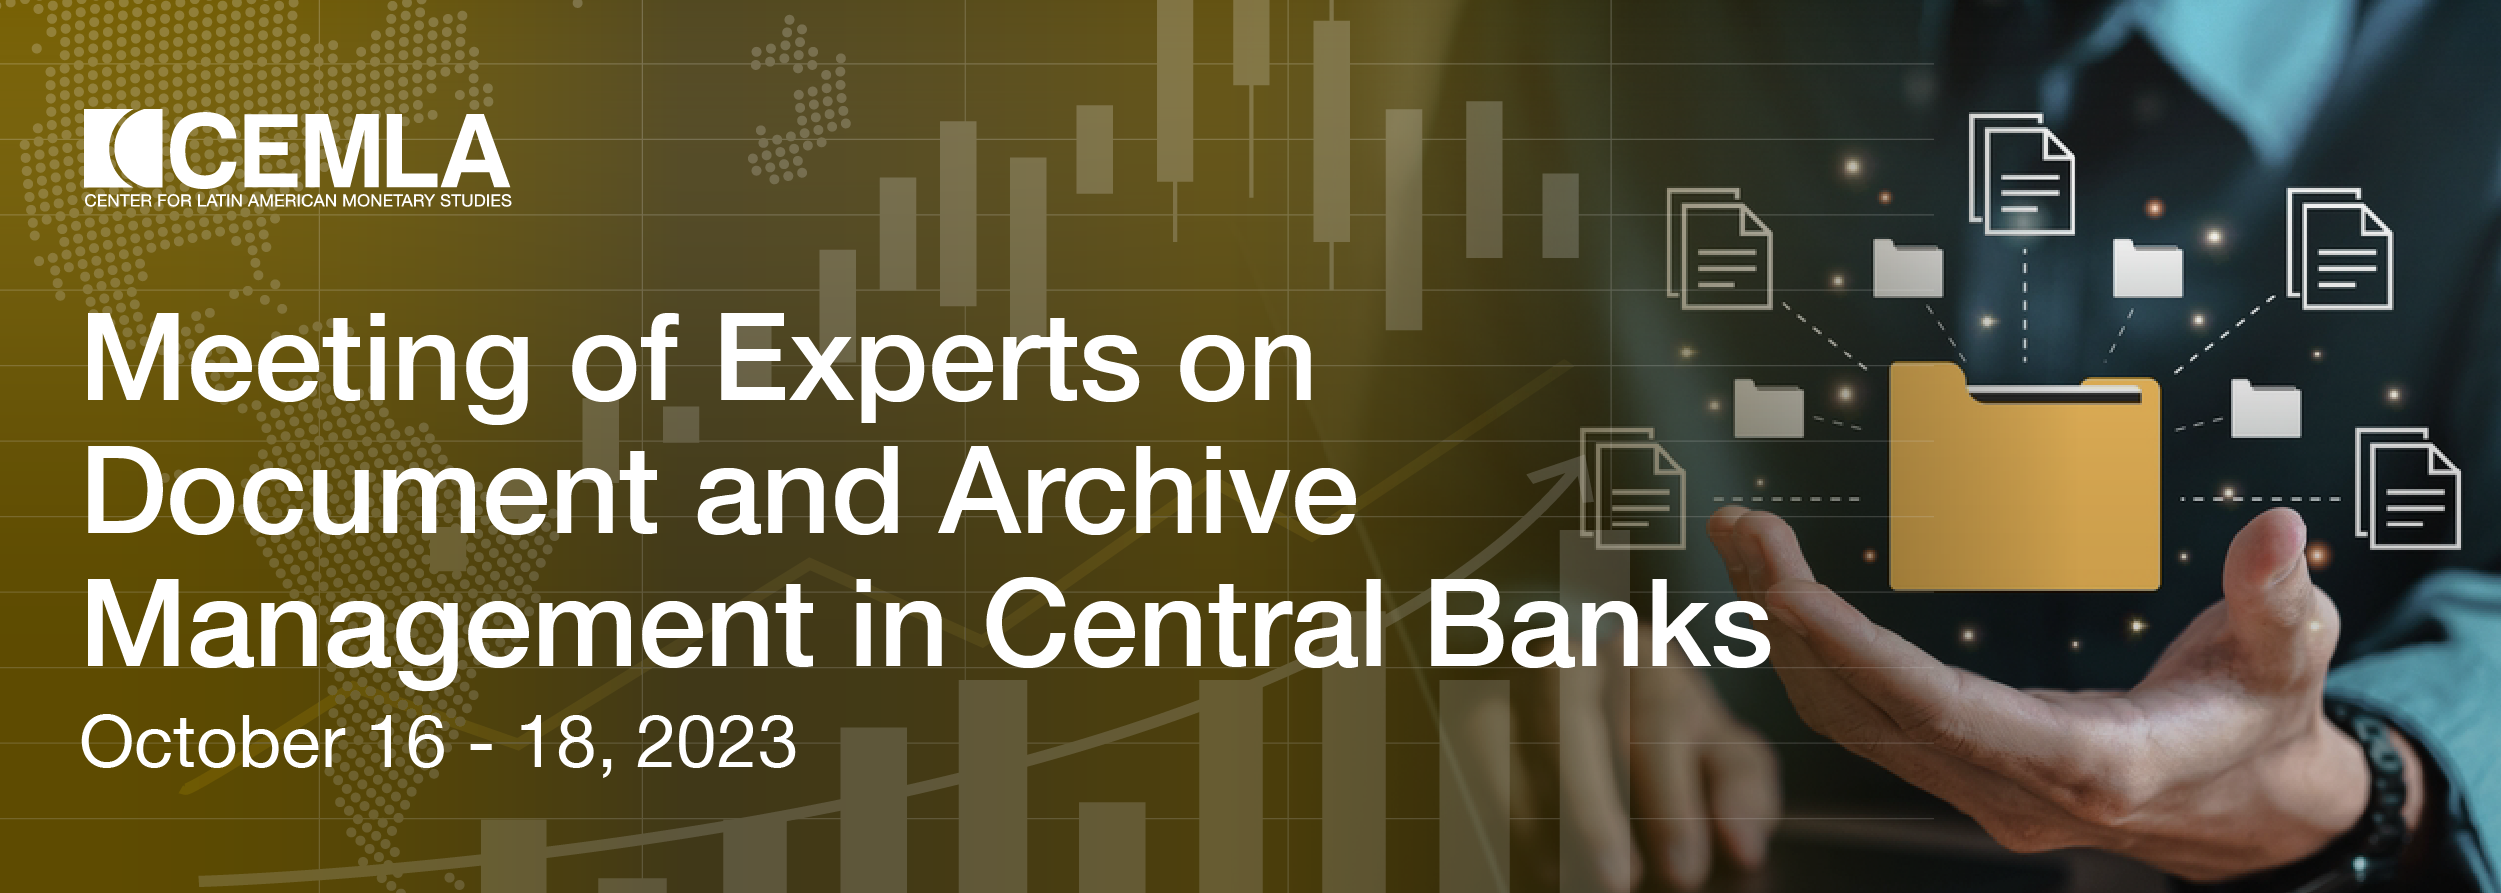 Meeting of Experts on Document and Archive Management in Central Banks